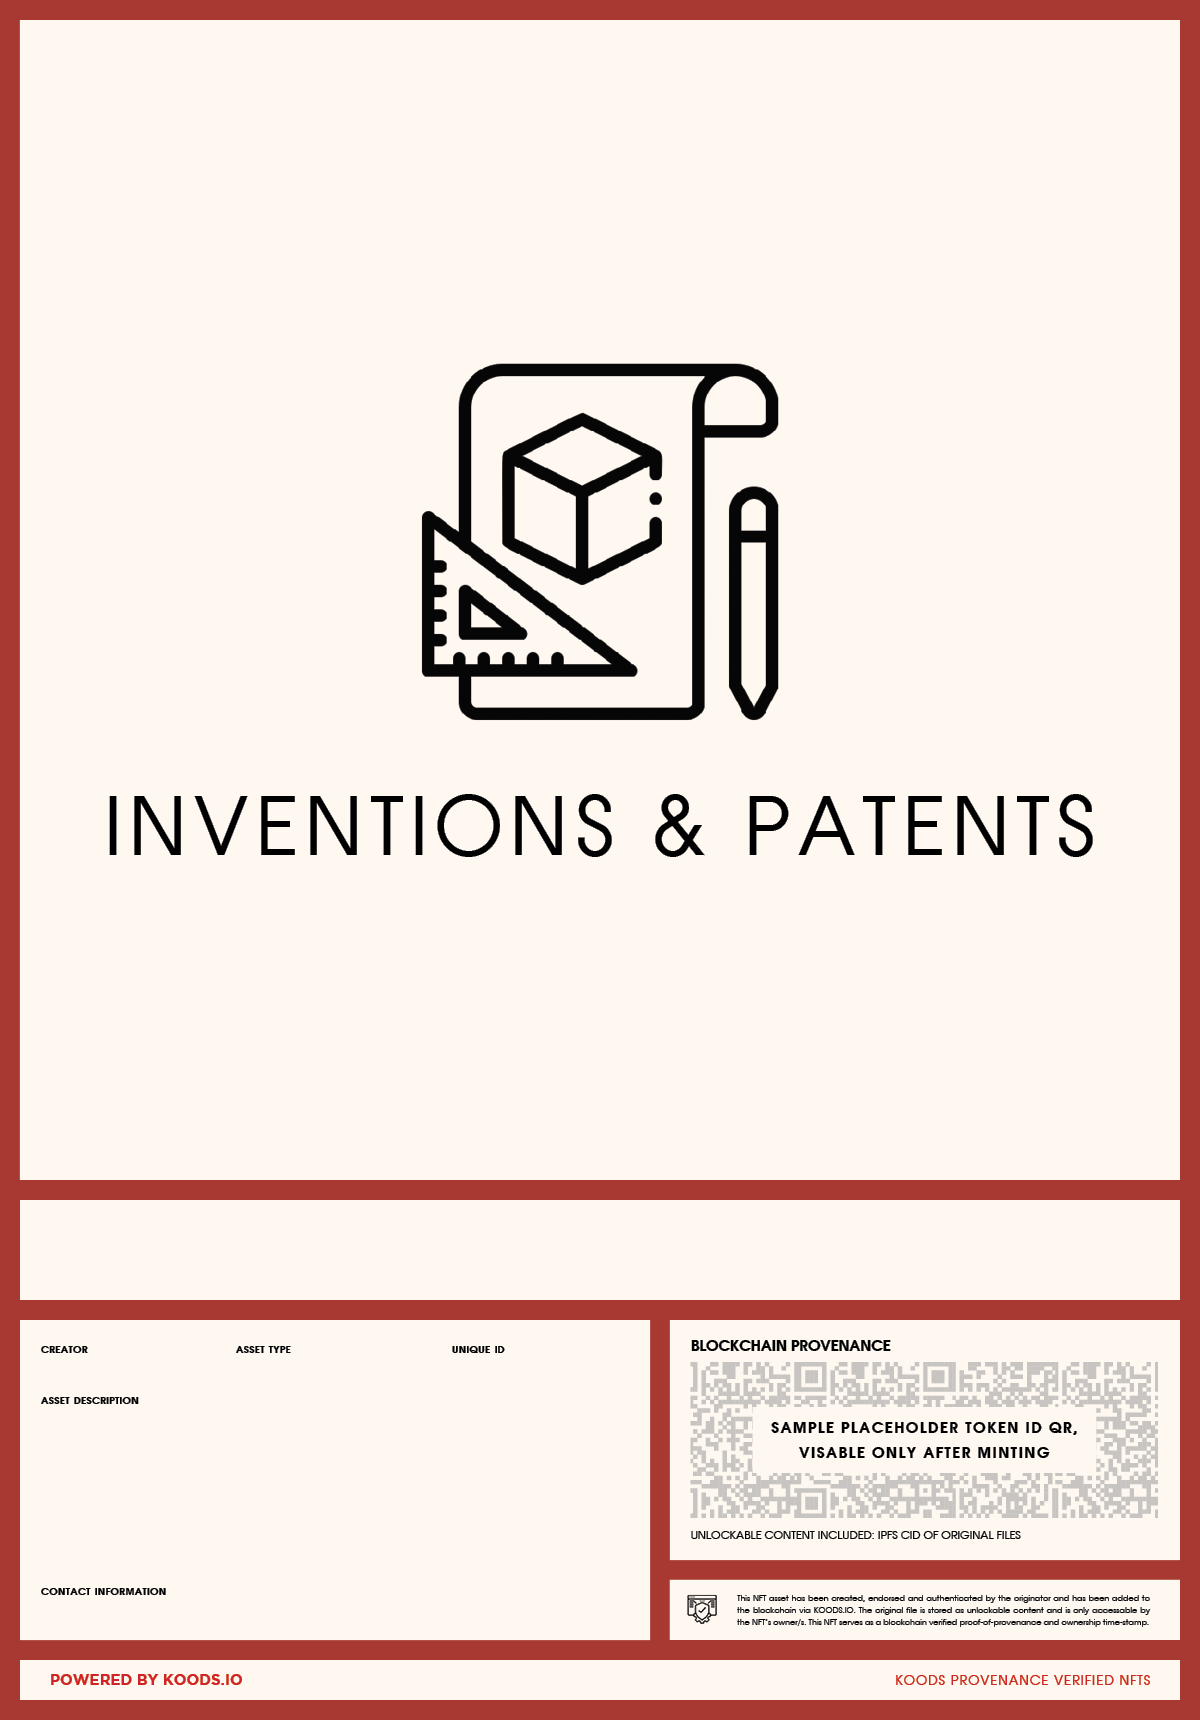 Inventions & Patents